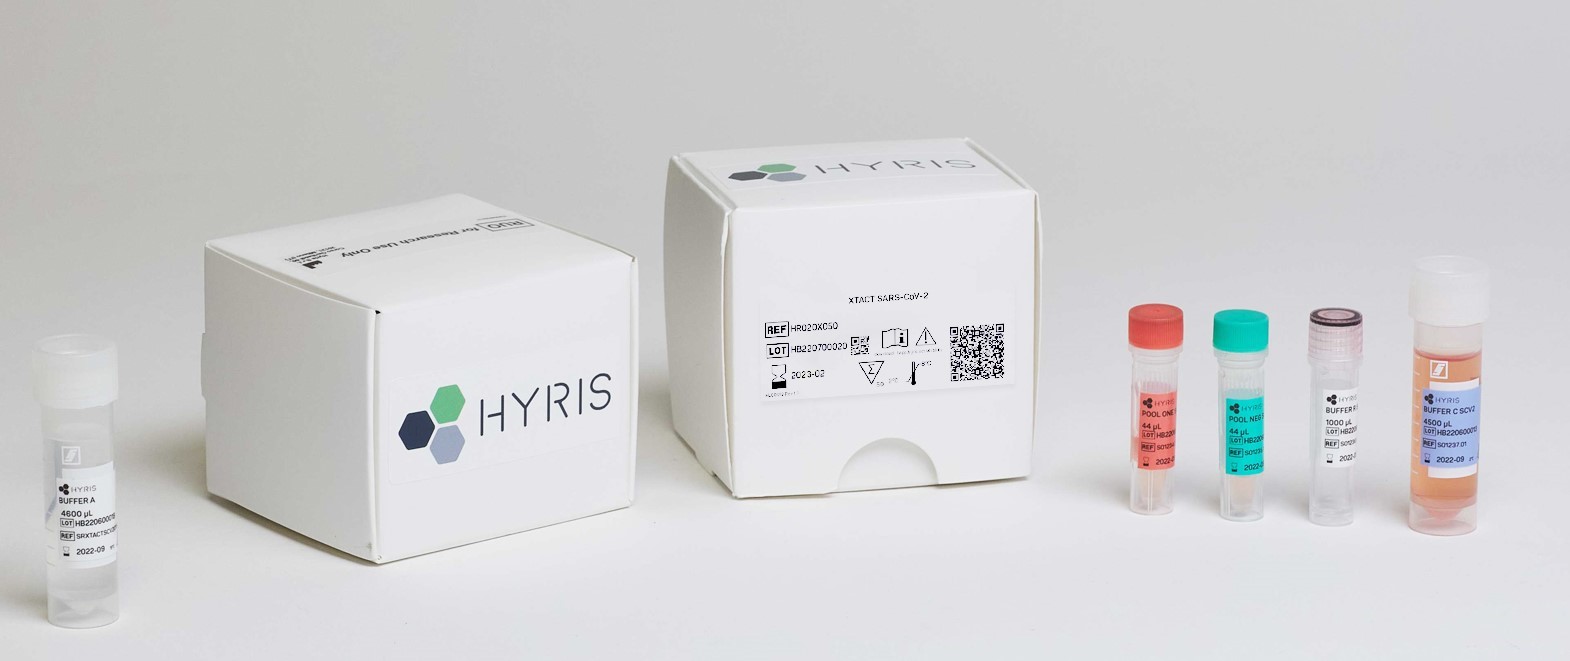 Hyris T-cell test kit. The kit is to measure the effectiveness of COVID-19 response in immune system. Used for COVID-19 vaccine research. T-cells are part of the immune system and if a person has been exposed to the SARS-Cov-2 virus or to the COVID-19 vaccine the body will develop a response. This response can be measured by real-time PCR of messager RNA. Photo shows the ingredients of the kit, including the peptide pool that reacts to the blood sample.